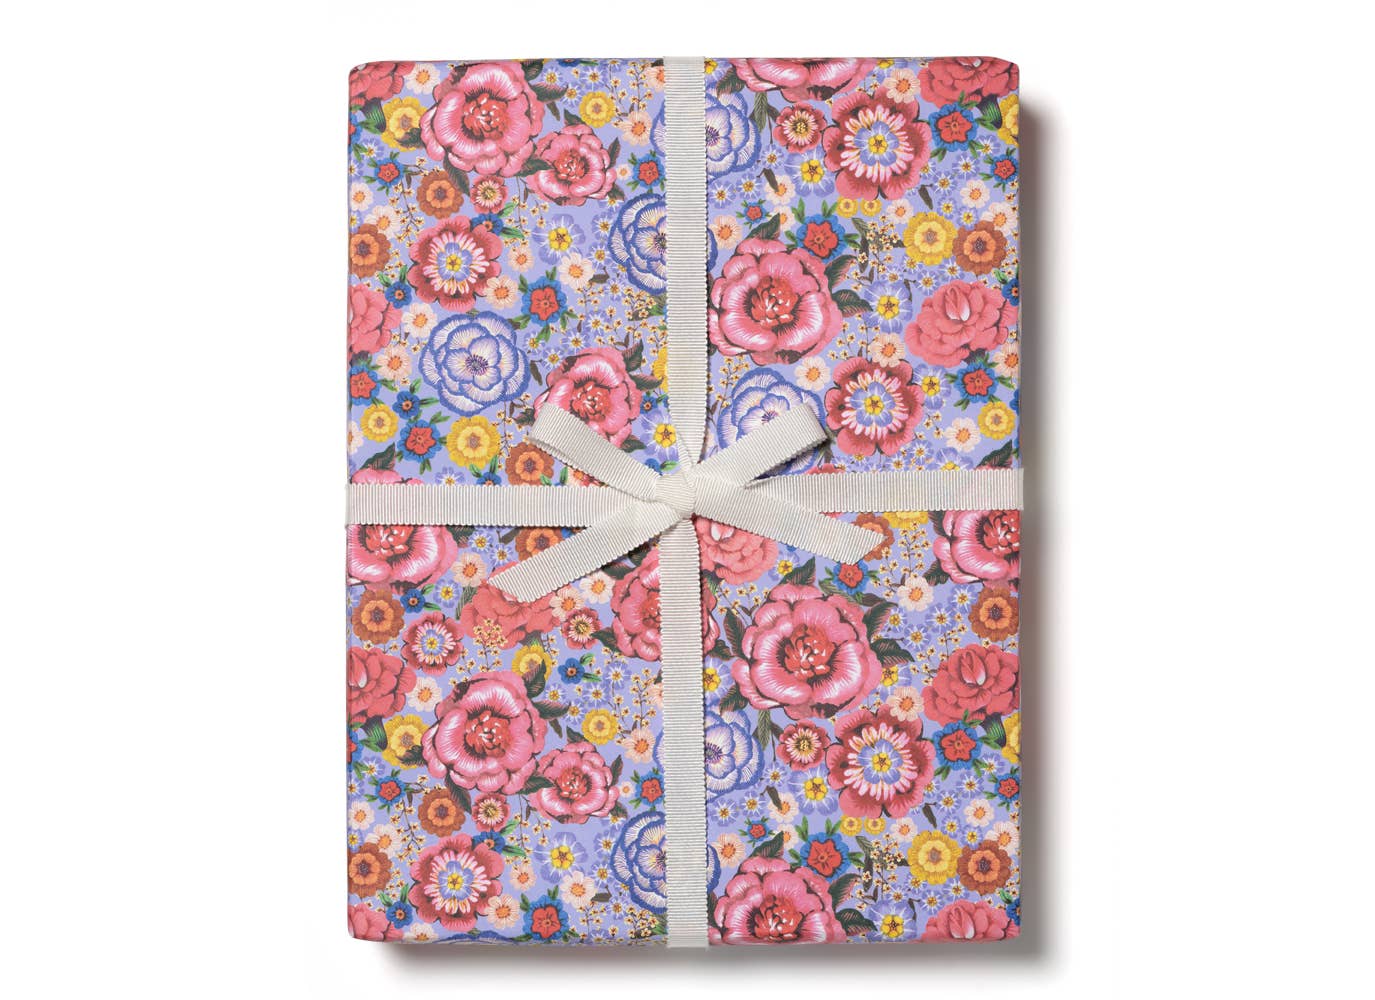 Blue Rose wrapping paper rolls